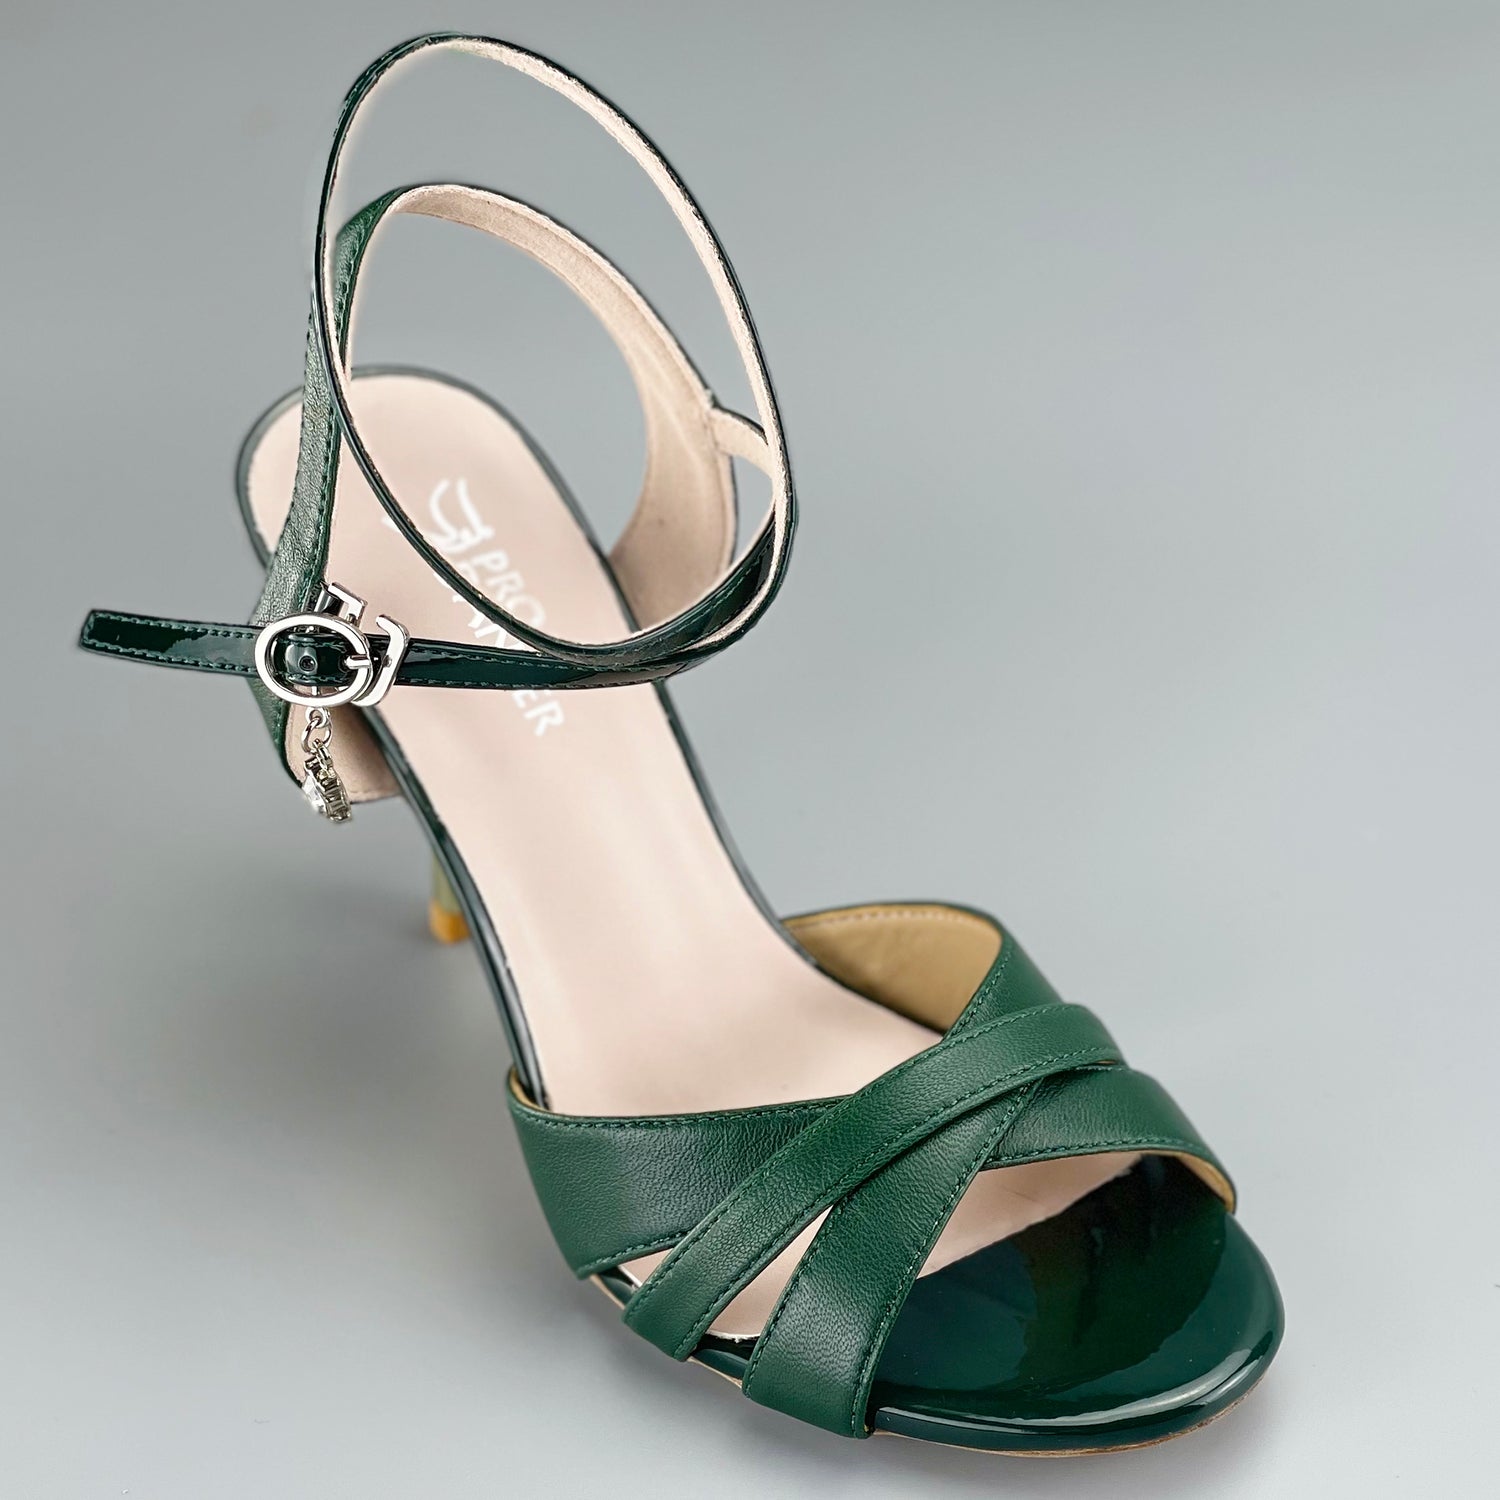 Pro Dancer Green Peep-toe Argentine Tango Shoes with Closed-back High Heels and Hard Leather Sole1